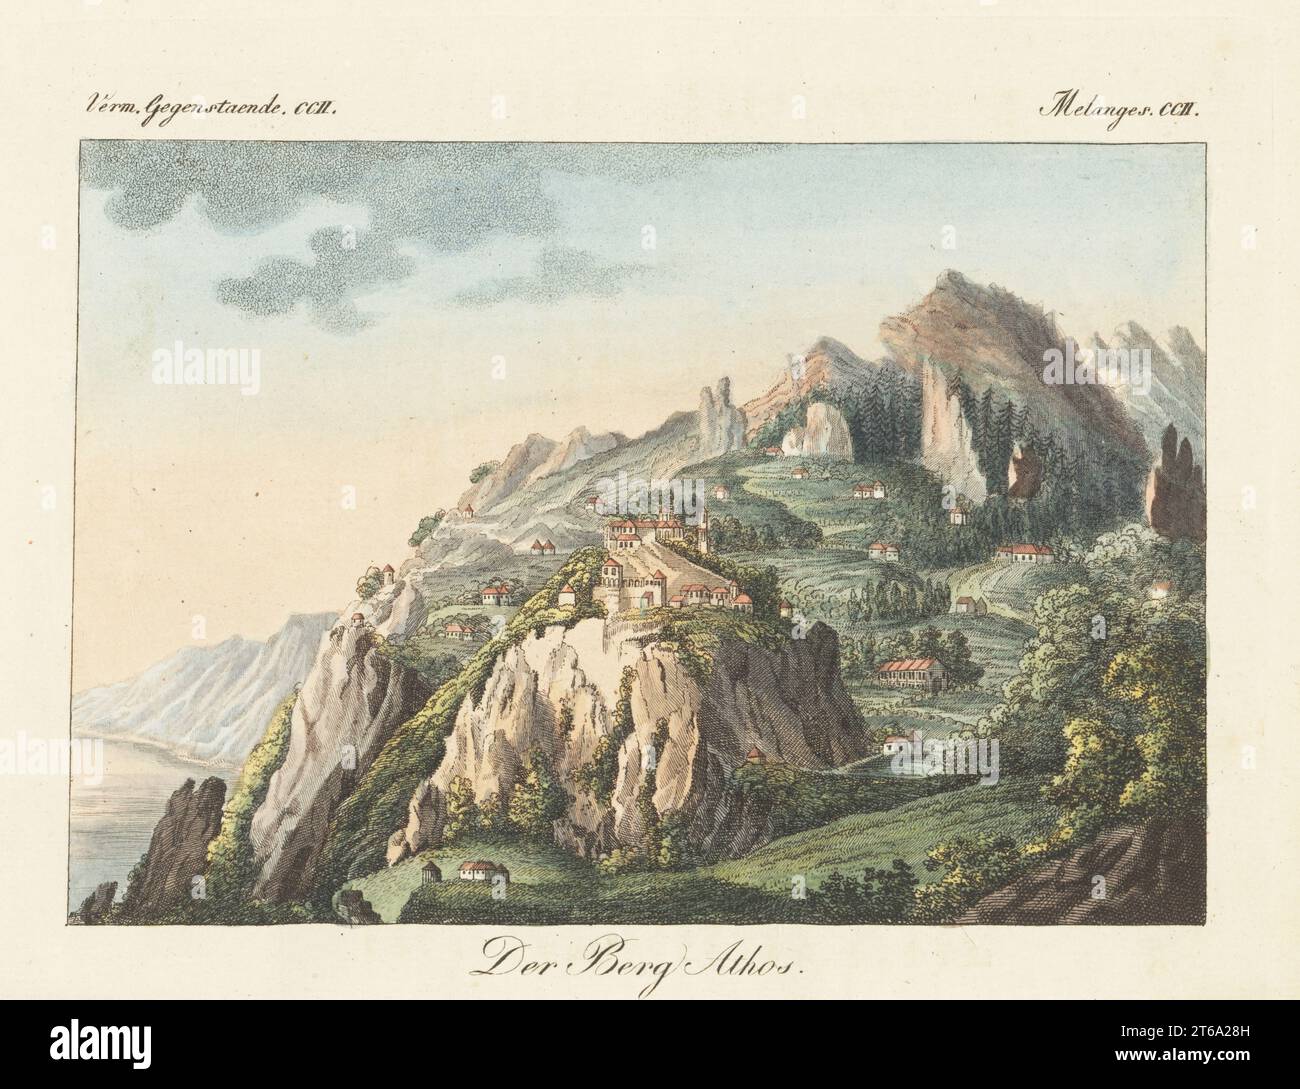 View of Mount Athos in Greece. Known as the Holy Mountain, Agios Oros, for its Eastern Orthodox monasteries Ansicht des Berges Athos. Handcoloured copperplate engraving from Carl Bertuch's Bilderbuch fur Kinder (Picture Book for Children), Weimar, 1815. A 12-volume encyclopedia for children illustrated with almost 1,200 engraved plates on natural history, science, costume, mythology, etc., published from 1790-1830. Stock Photo